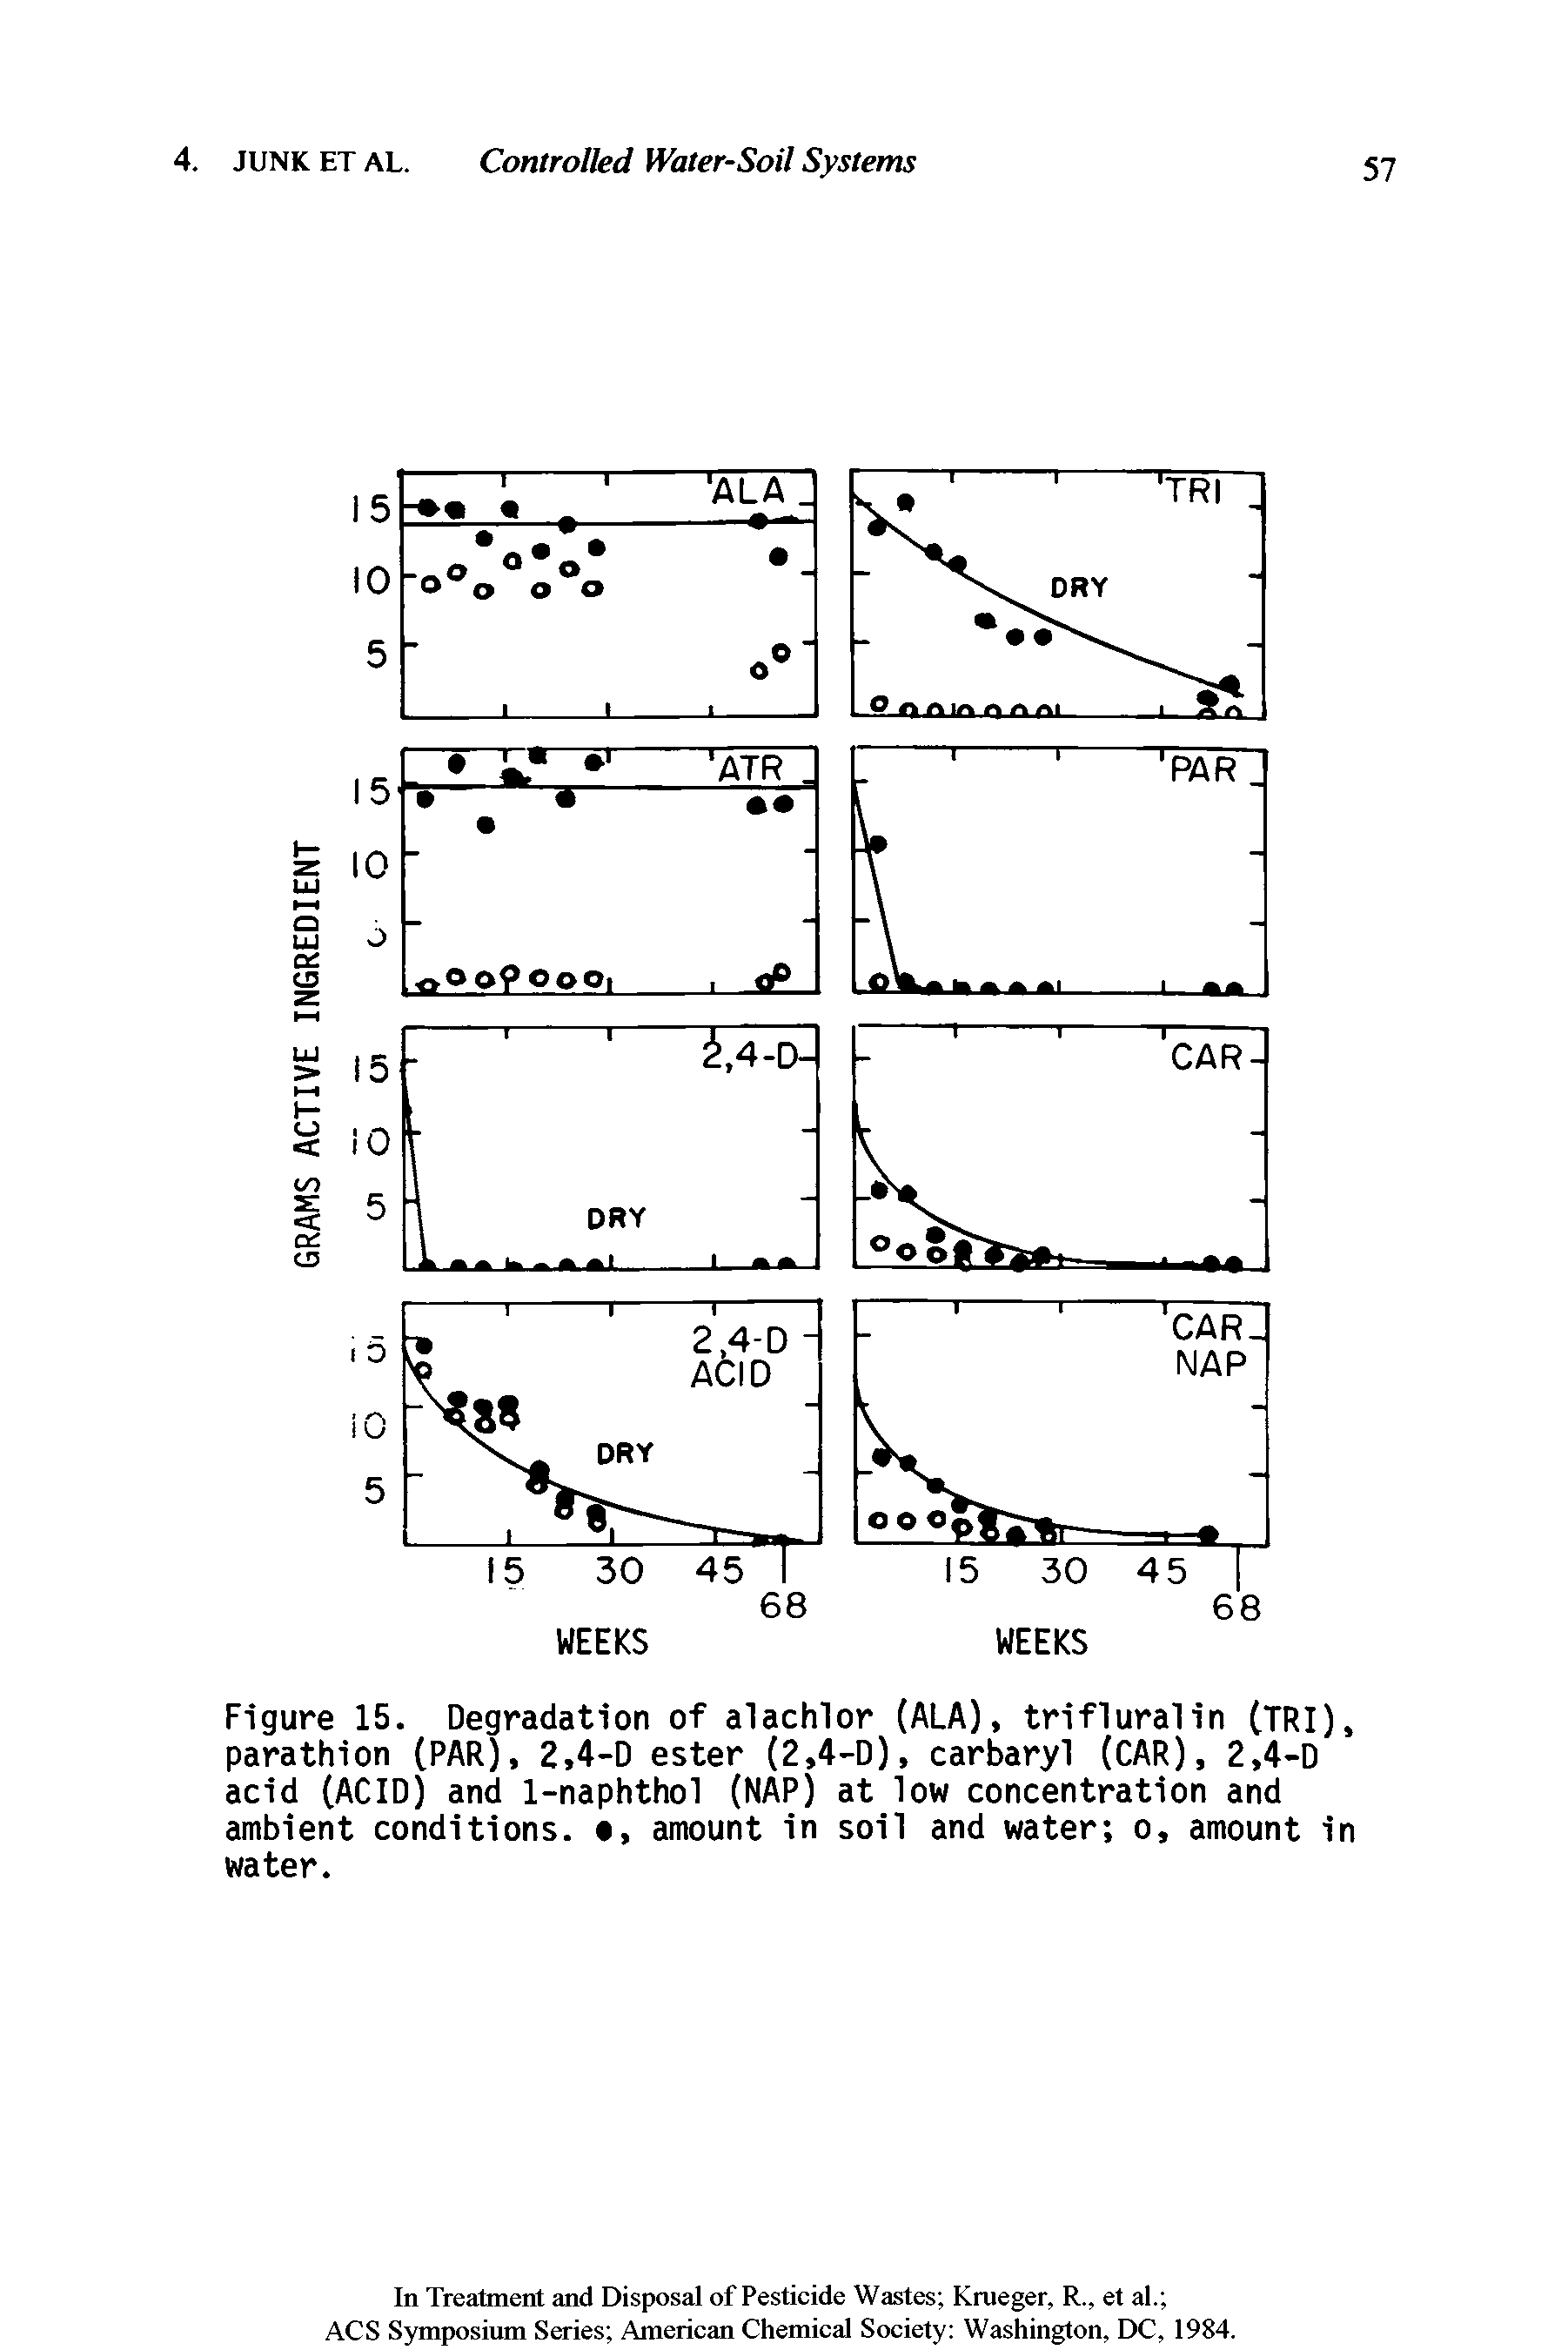 Figure 15. Degradation of alachlor (ALA), trifiuraiin (TRI), parathion (PAR), 2,4-D ester (2,4-D), carbaryl (CAR), 2,4-D acid (ACID) and 1-naphthol (NAP) at low concentration and ambient conditions. , amount in soil and water o, amount in water.